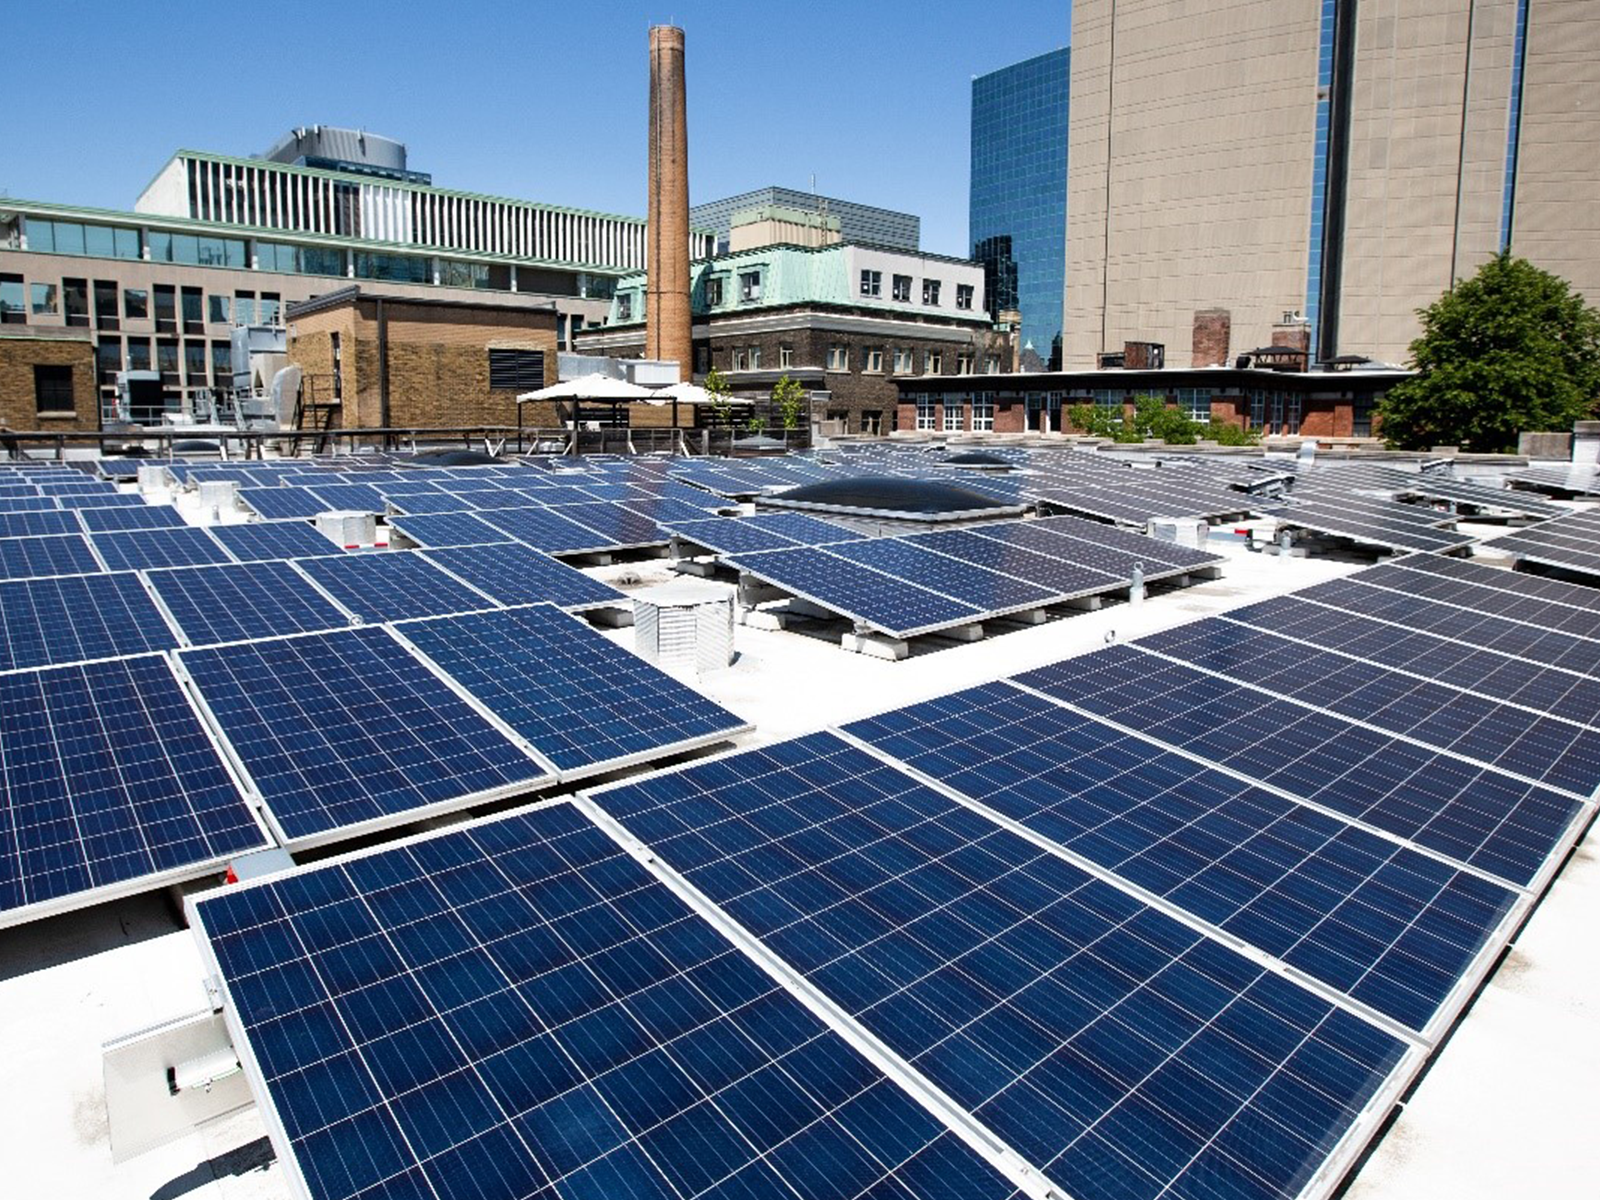 A rooftop solar array on a commercial building